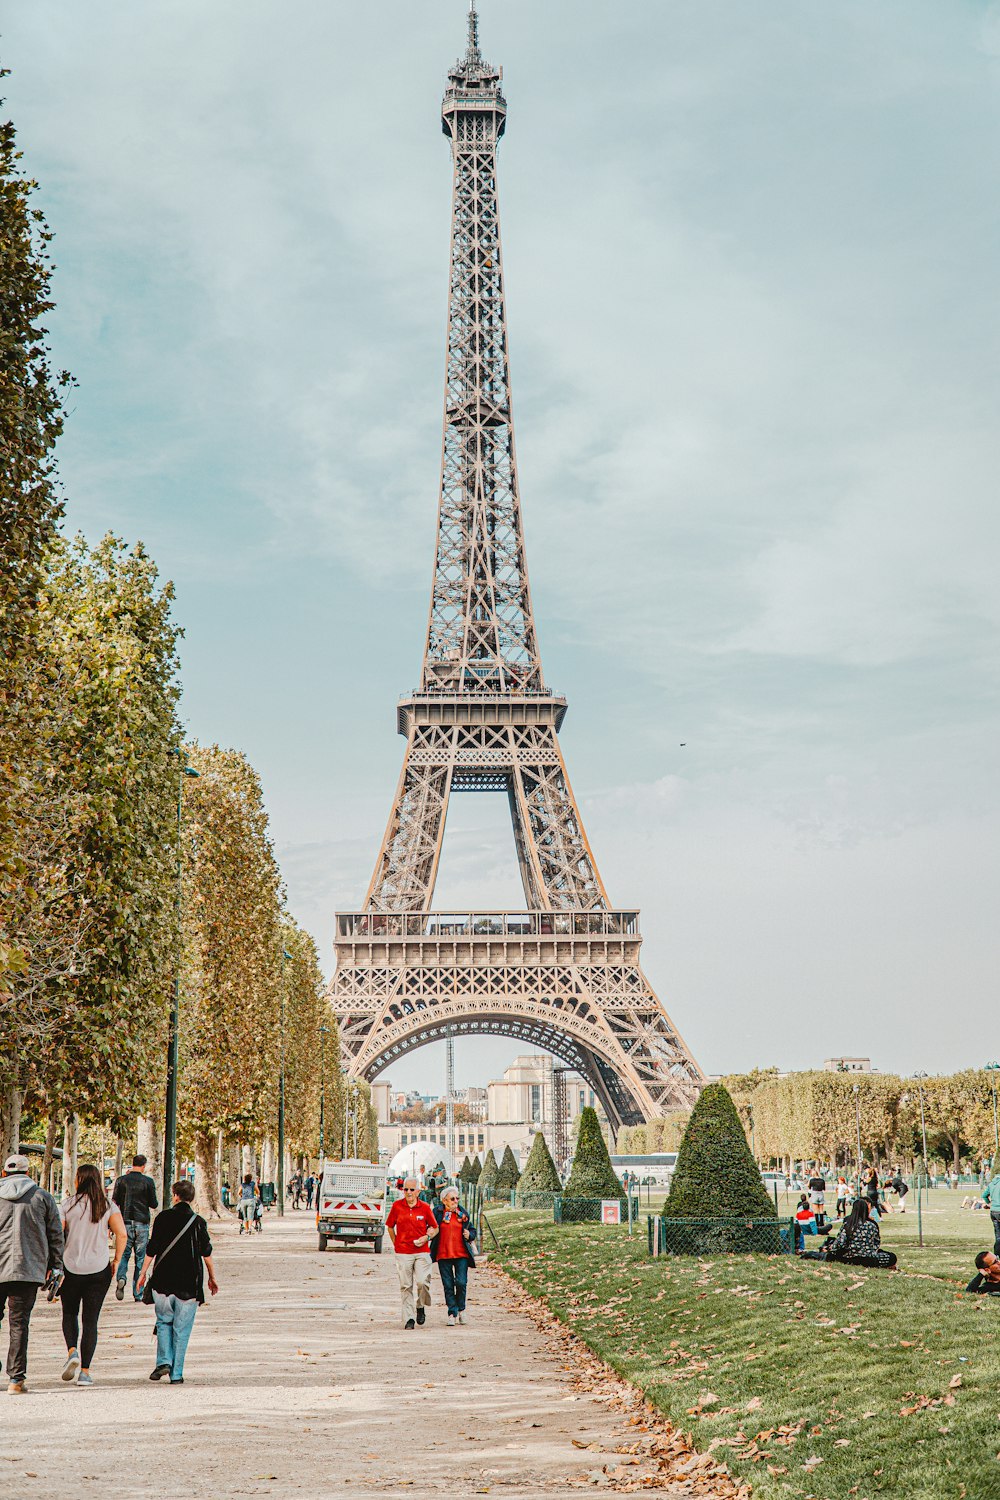 people walking on park with eiffel tower in background during daytime